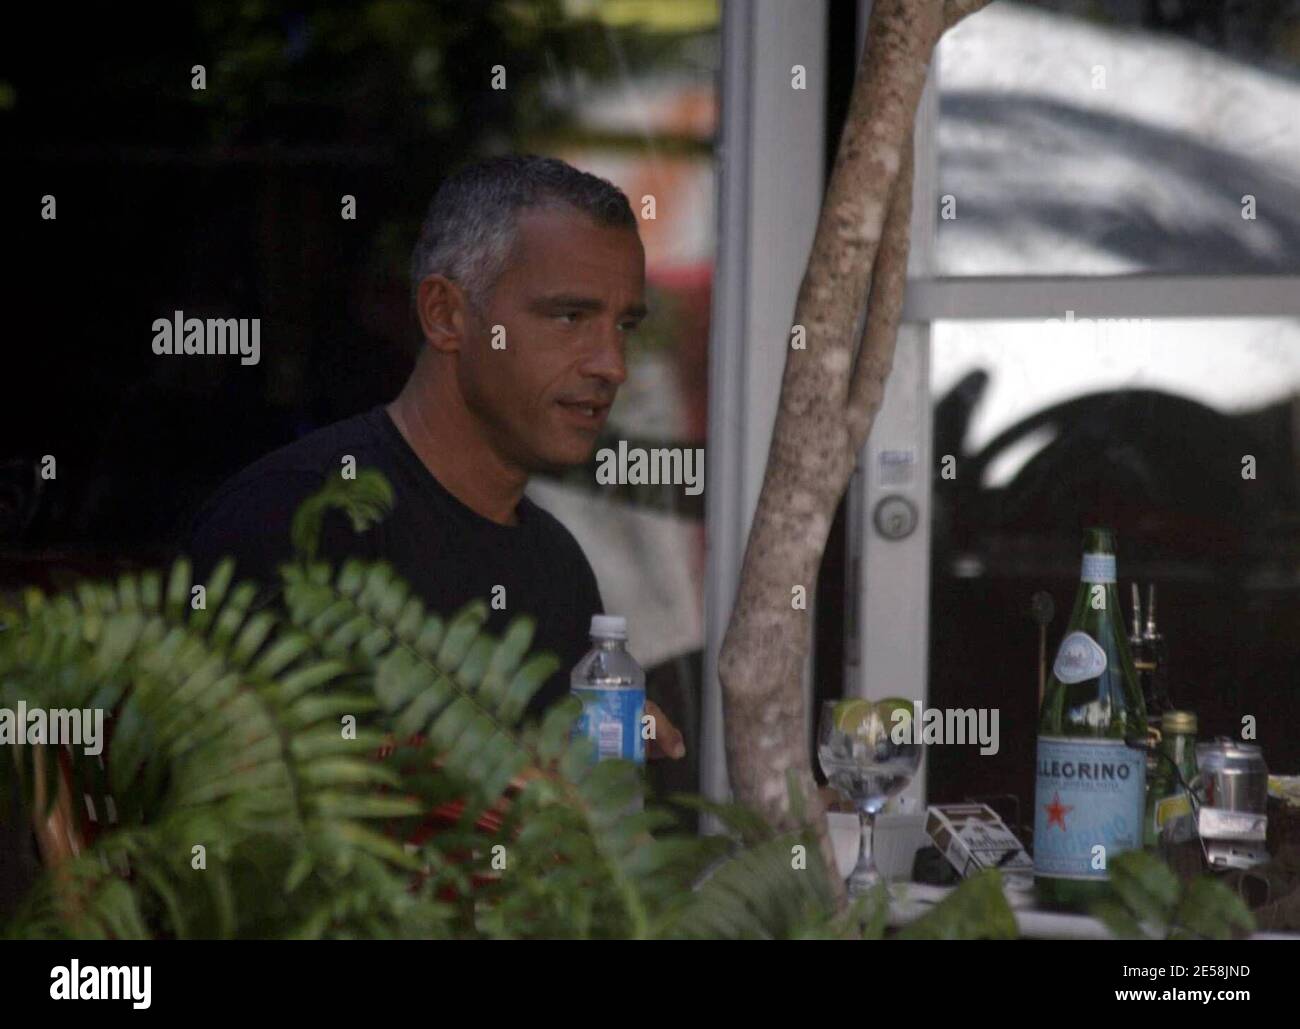 Italian singing sensation Eros Ramazzotti shoots a music video in Miami  Beach before relaxing with a coffee and cigarette. Miami, Fla. 9/5/07.  [[mab]] Stock Photo - Alamy